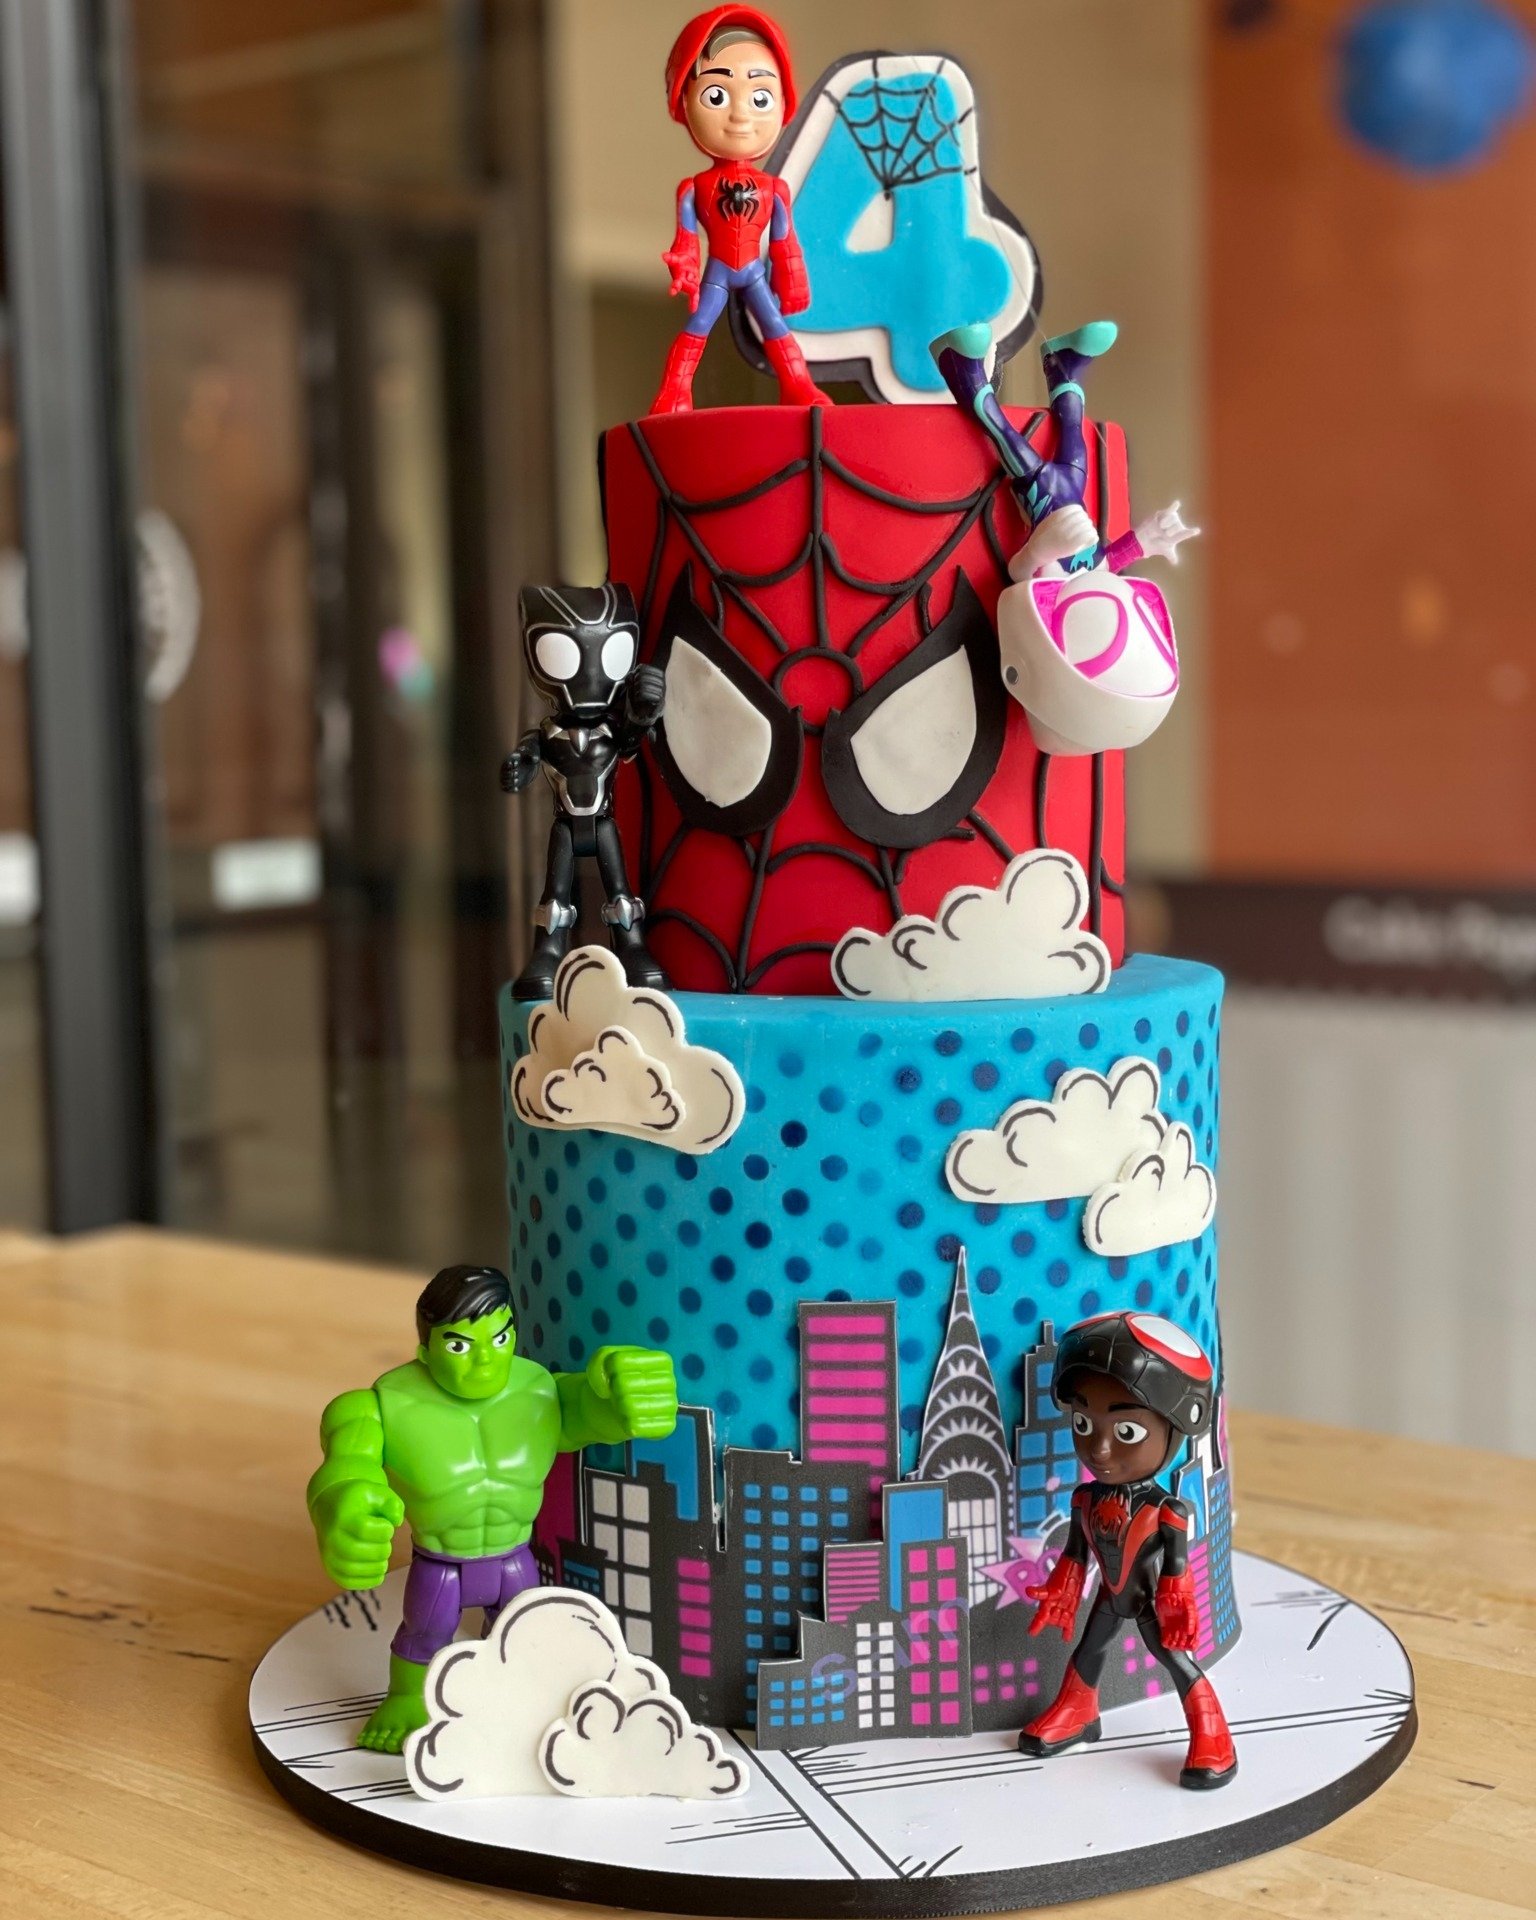 &quot;With great power comes great responsibility&quot; 🕷 We absolutely loved making this SUPER fun cake filled with a whole crew of your friendly neighborhood Spider-friends #opelika #bakery #Auburn #customcake #cakeitecturebakery #spiderman #spide